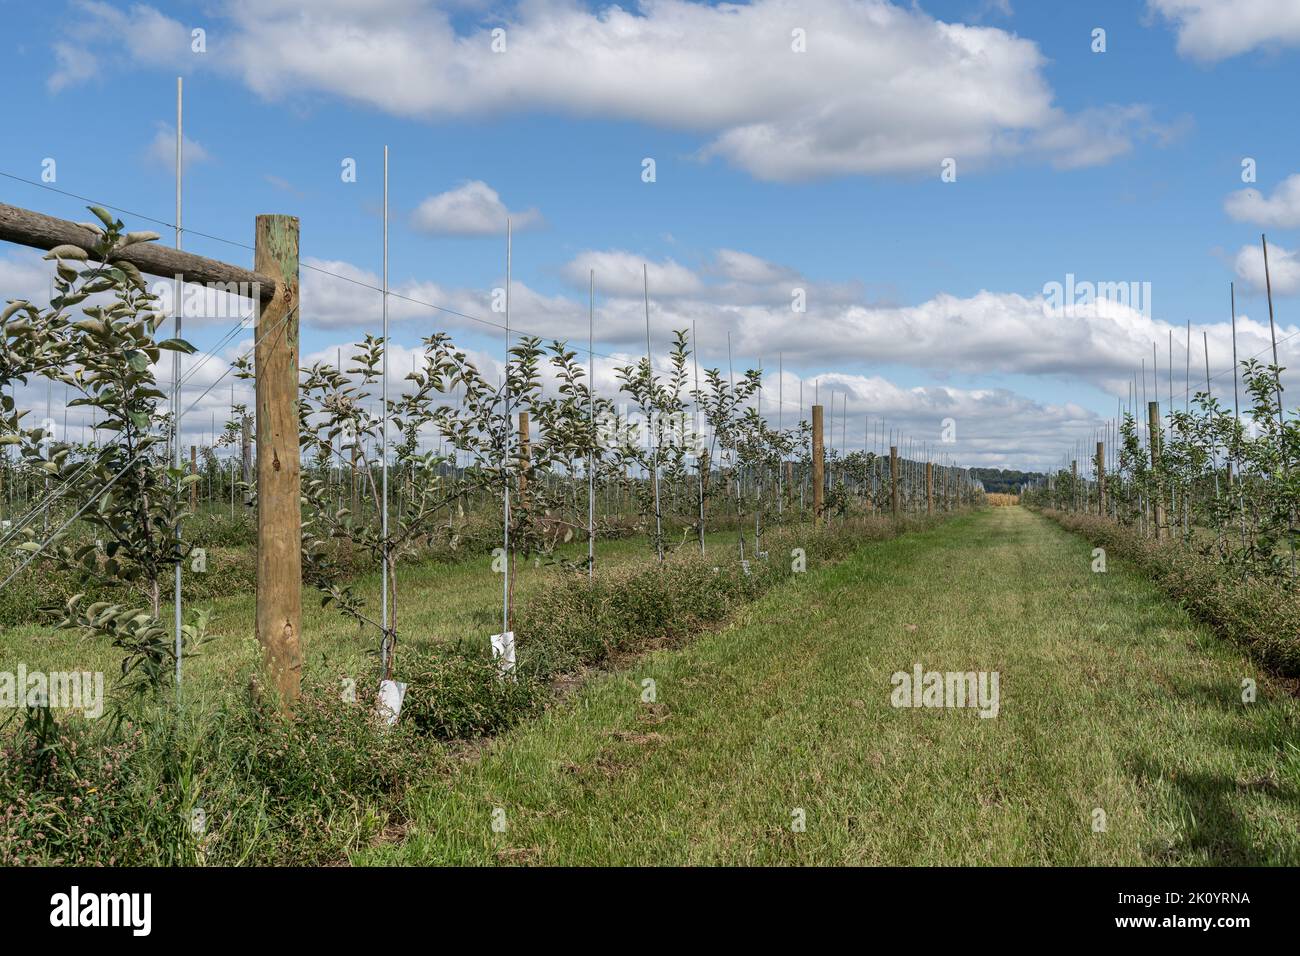 Newly planted apple trees at orchard in rural, Pennsylvania Stock Photo